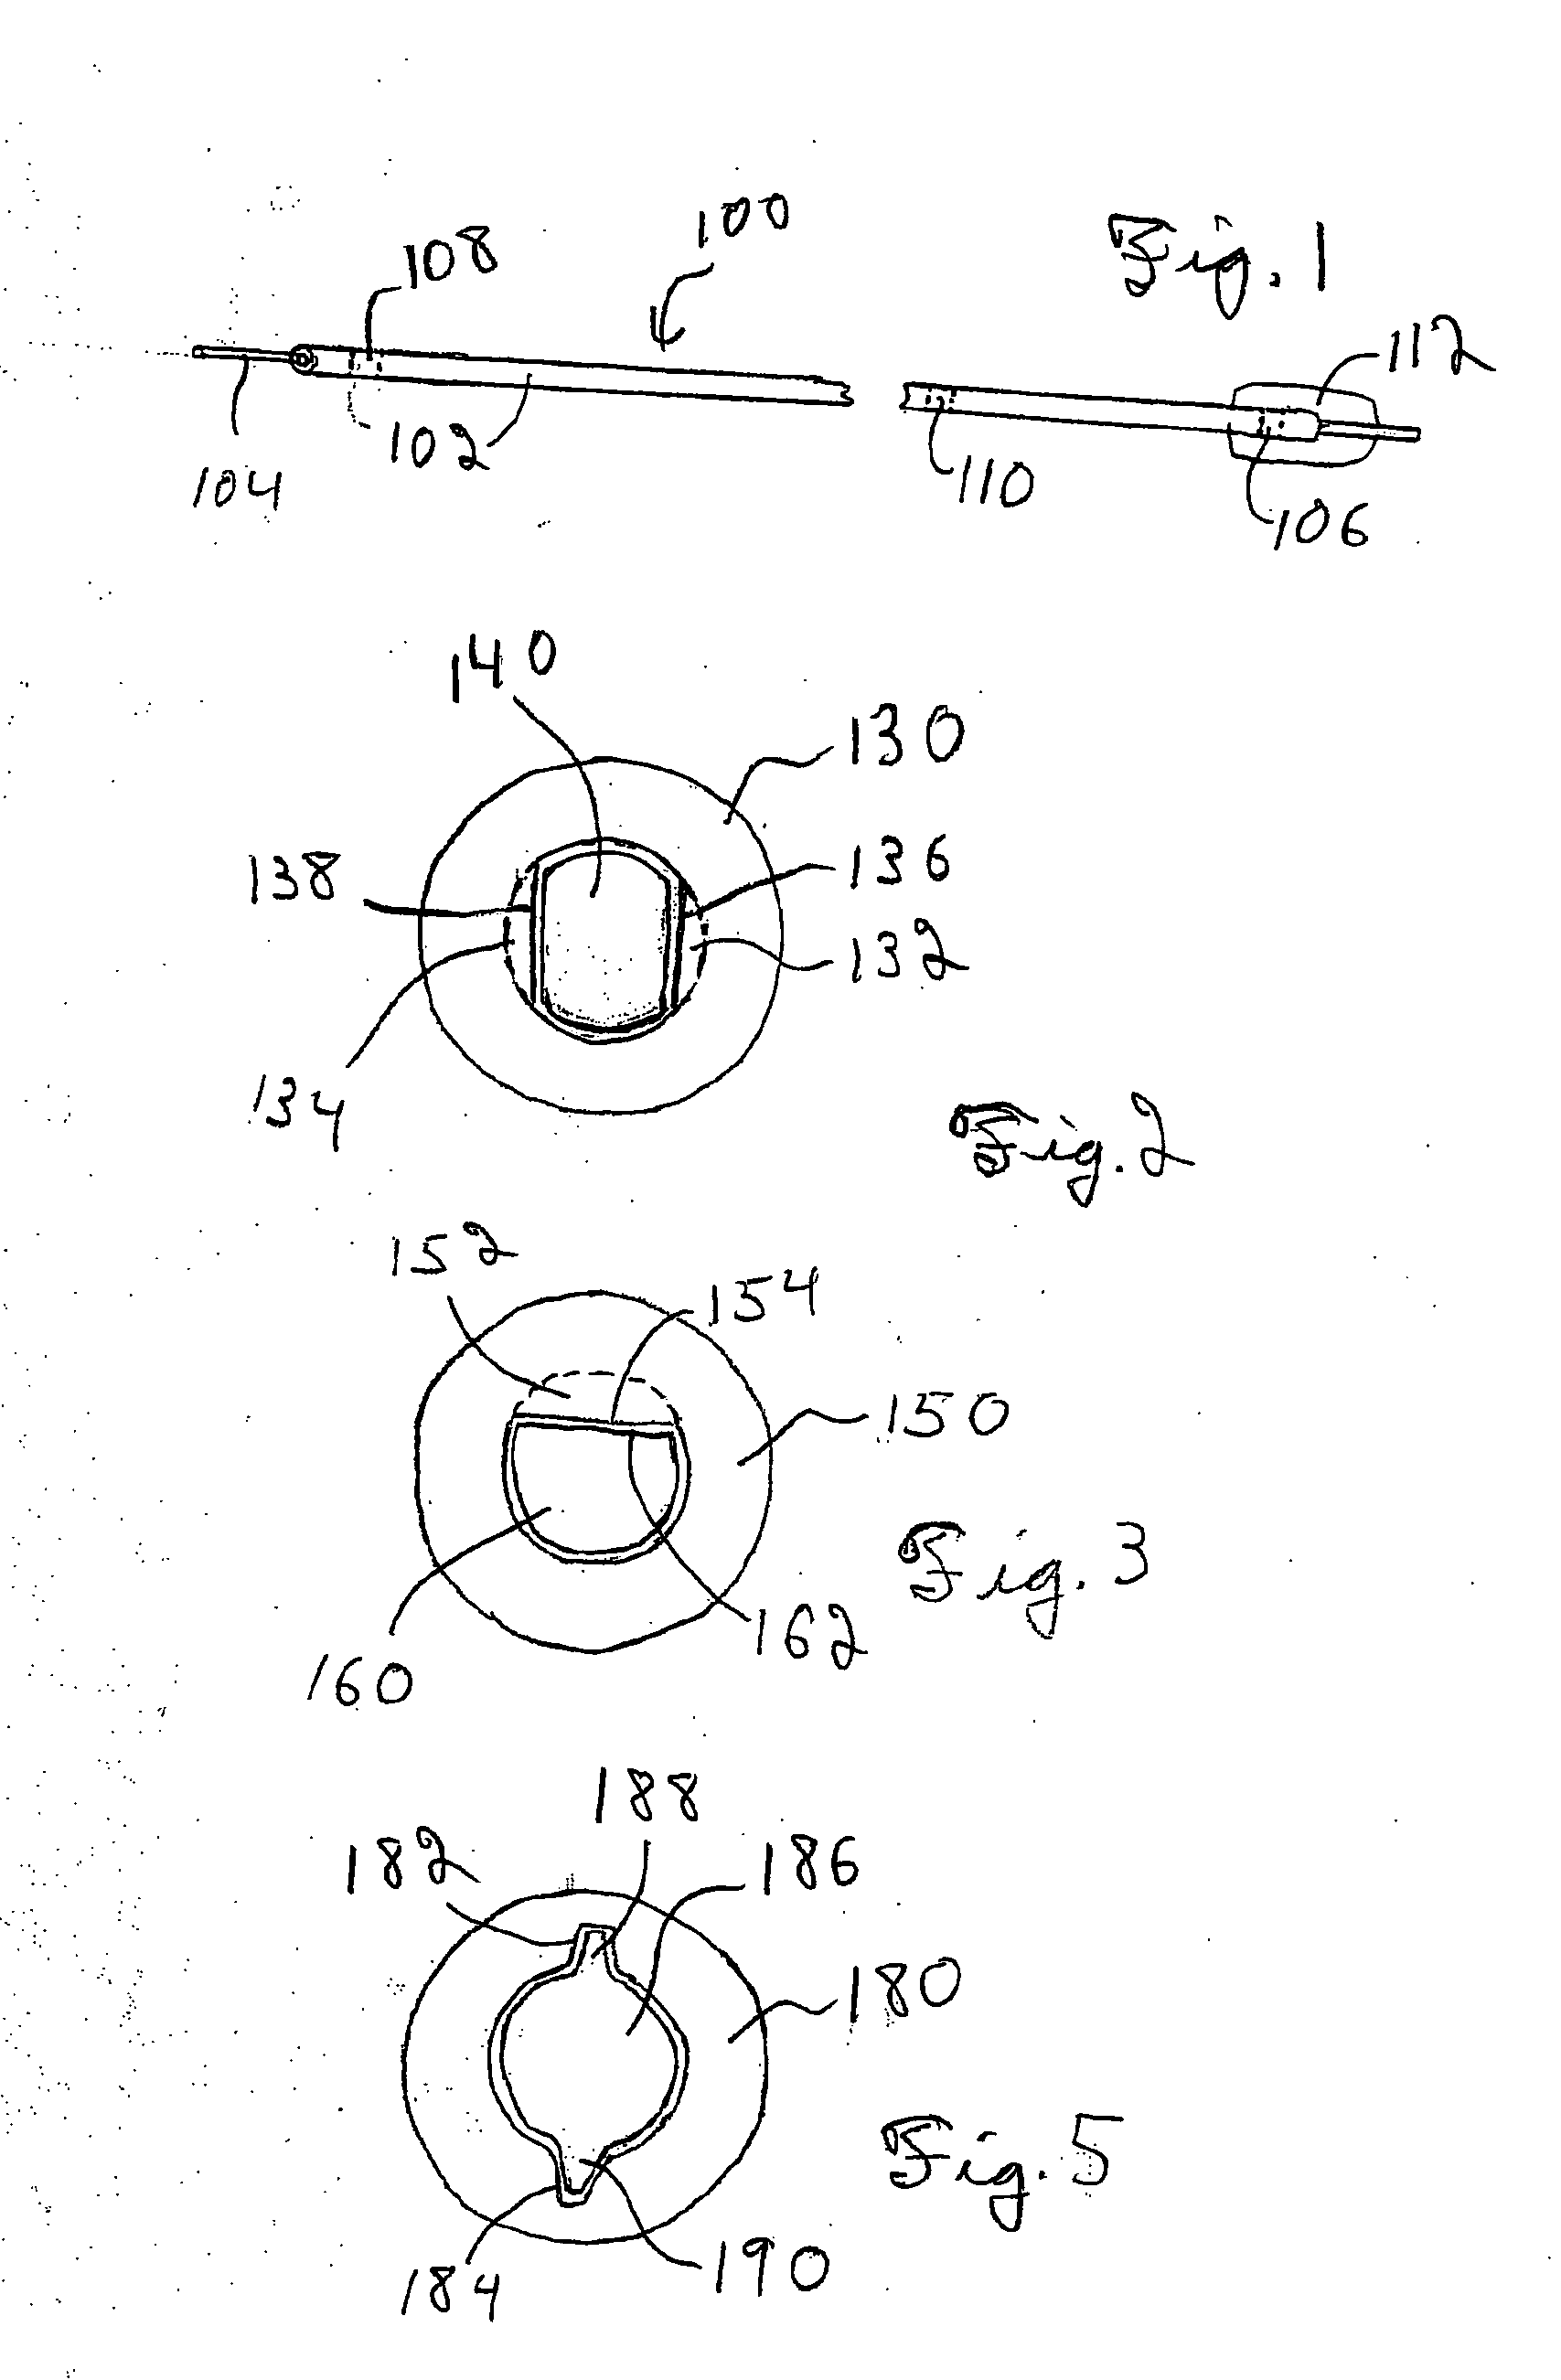 Steerable device having a corewire within a tube and combination with a functional medical component